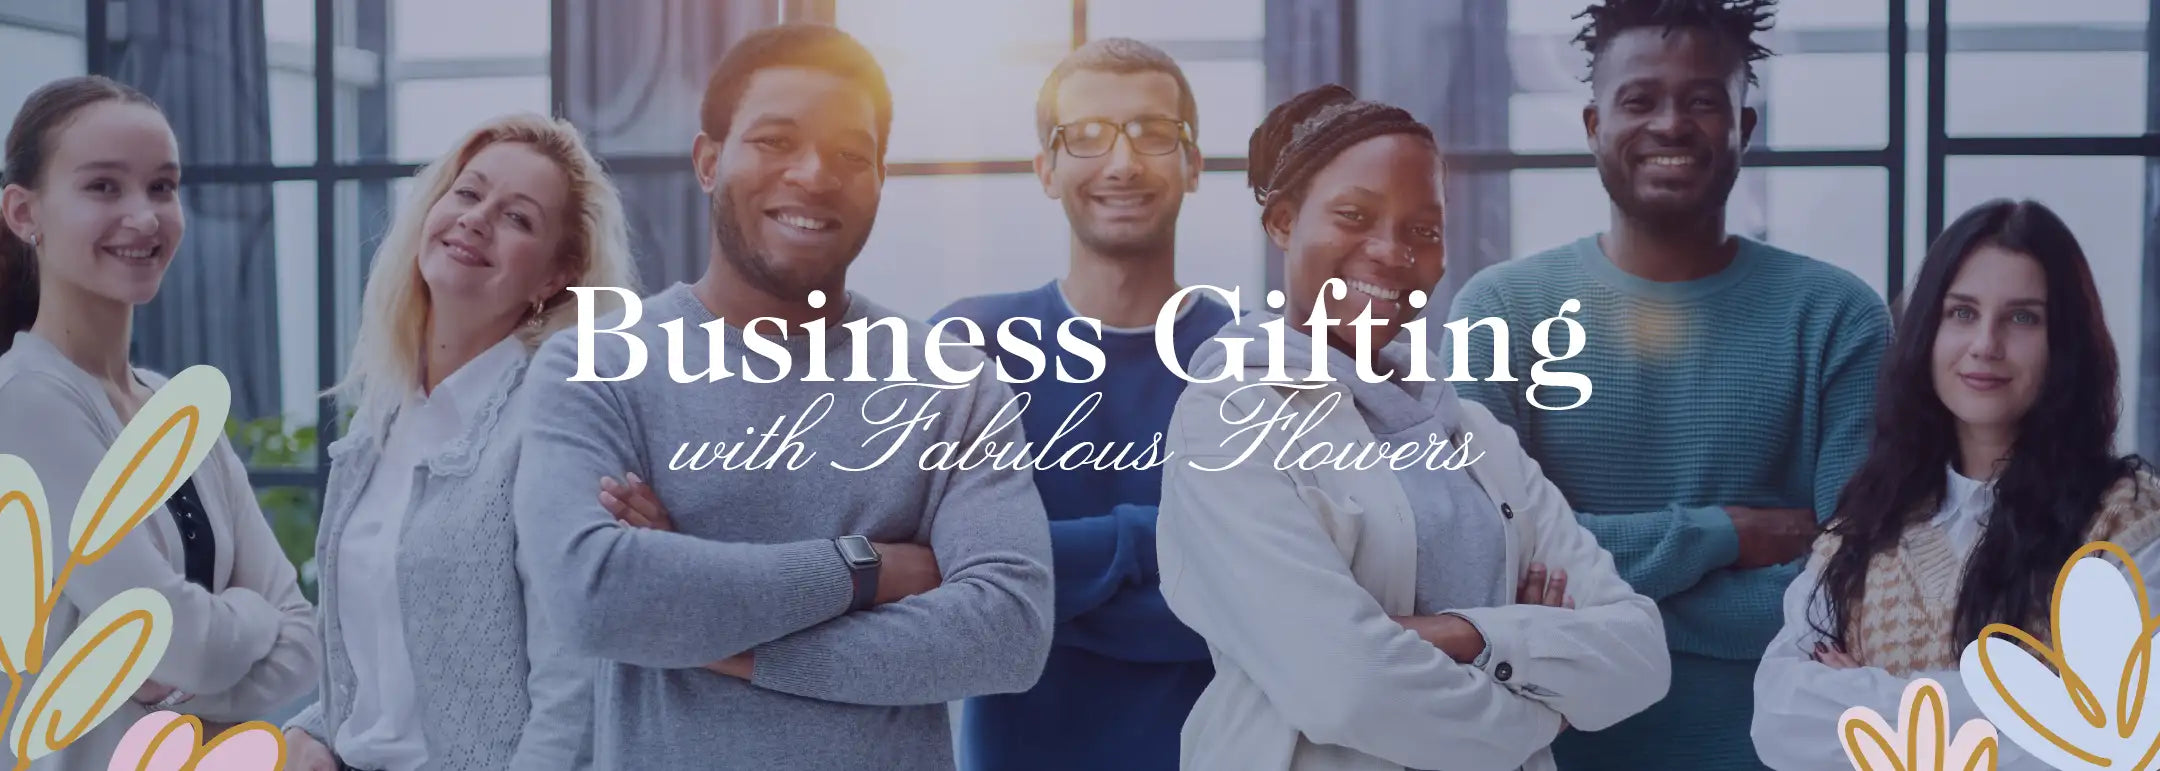 Diverse group of smiling professionals standing confidently with arms crossed in a modern office setting. Business Gifting with Fabulous Flowers. Fabulous Flowers and Gifts. Business Gifting.